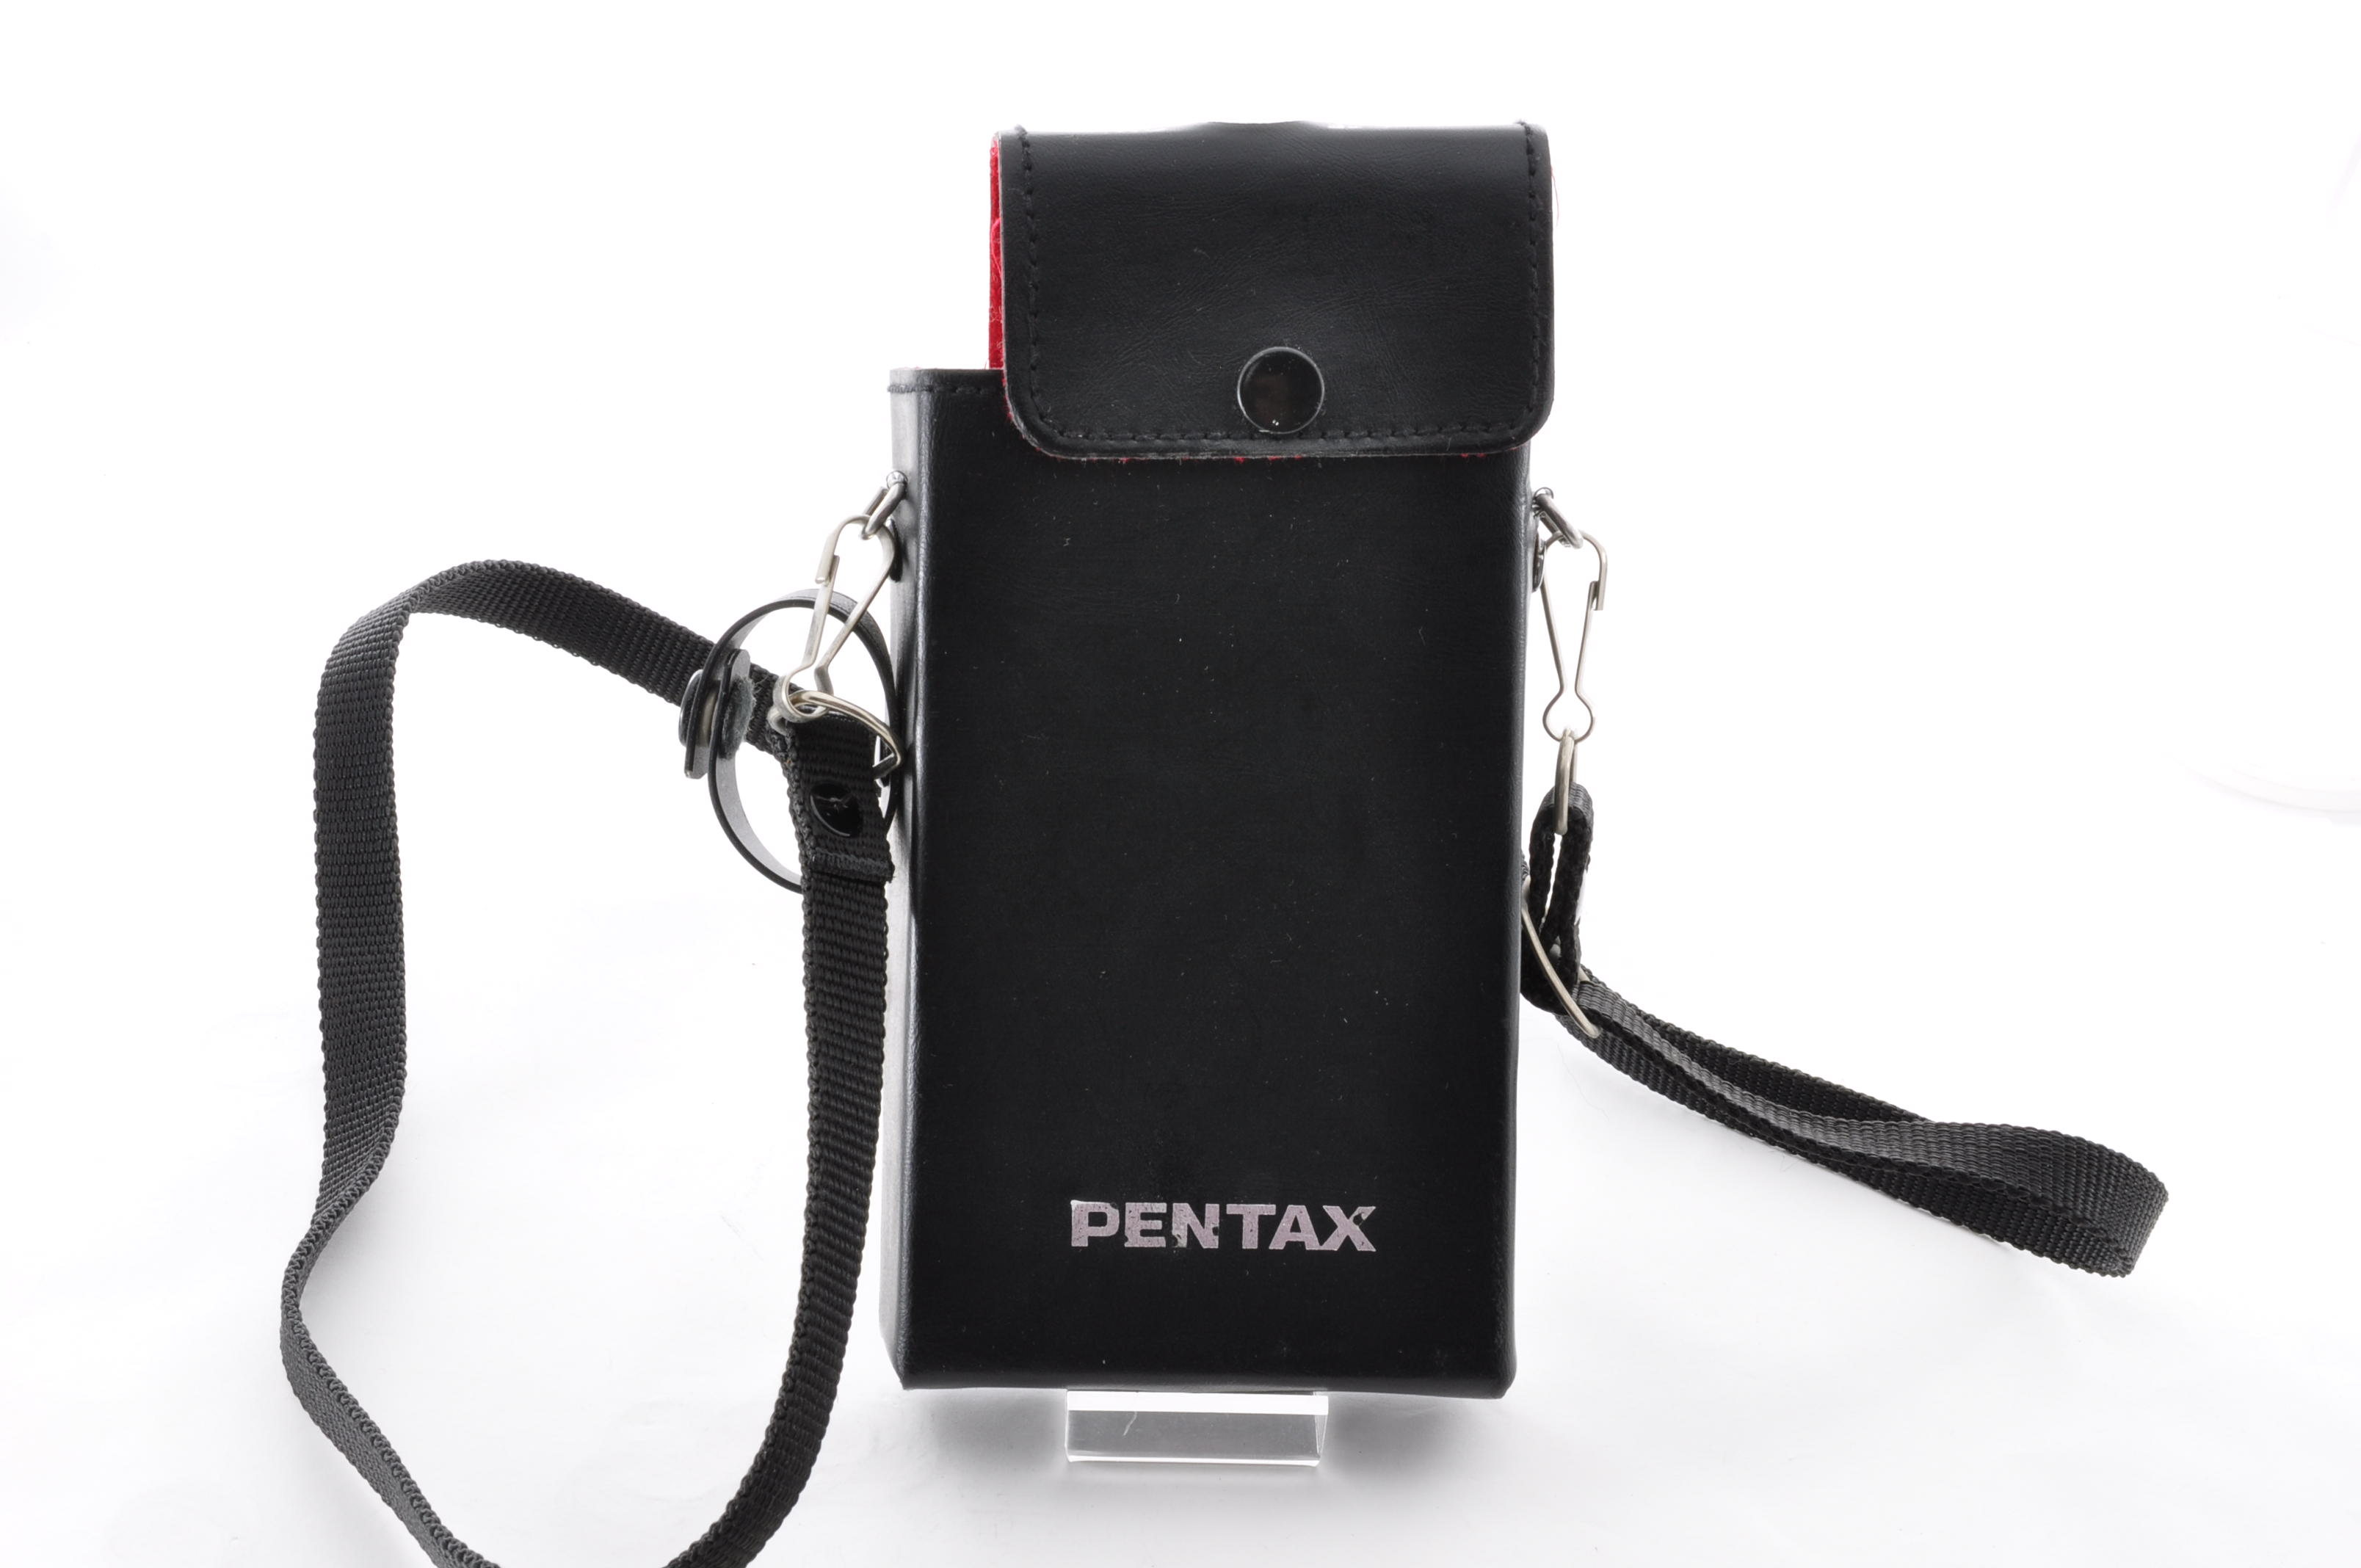 Pentax TR POWER PACK-2 PW-222 External Battery Pack [Near Mint] From Japan img12